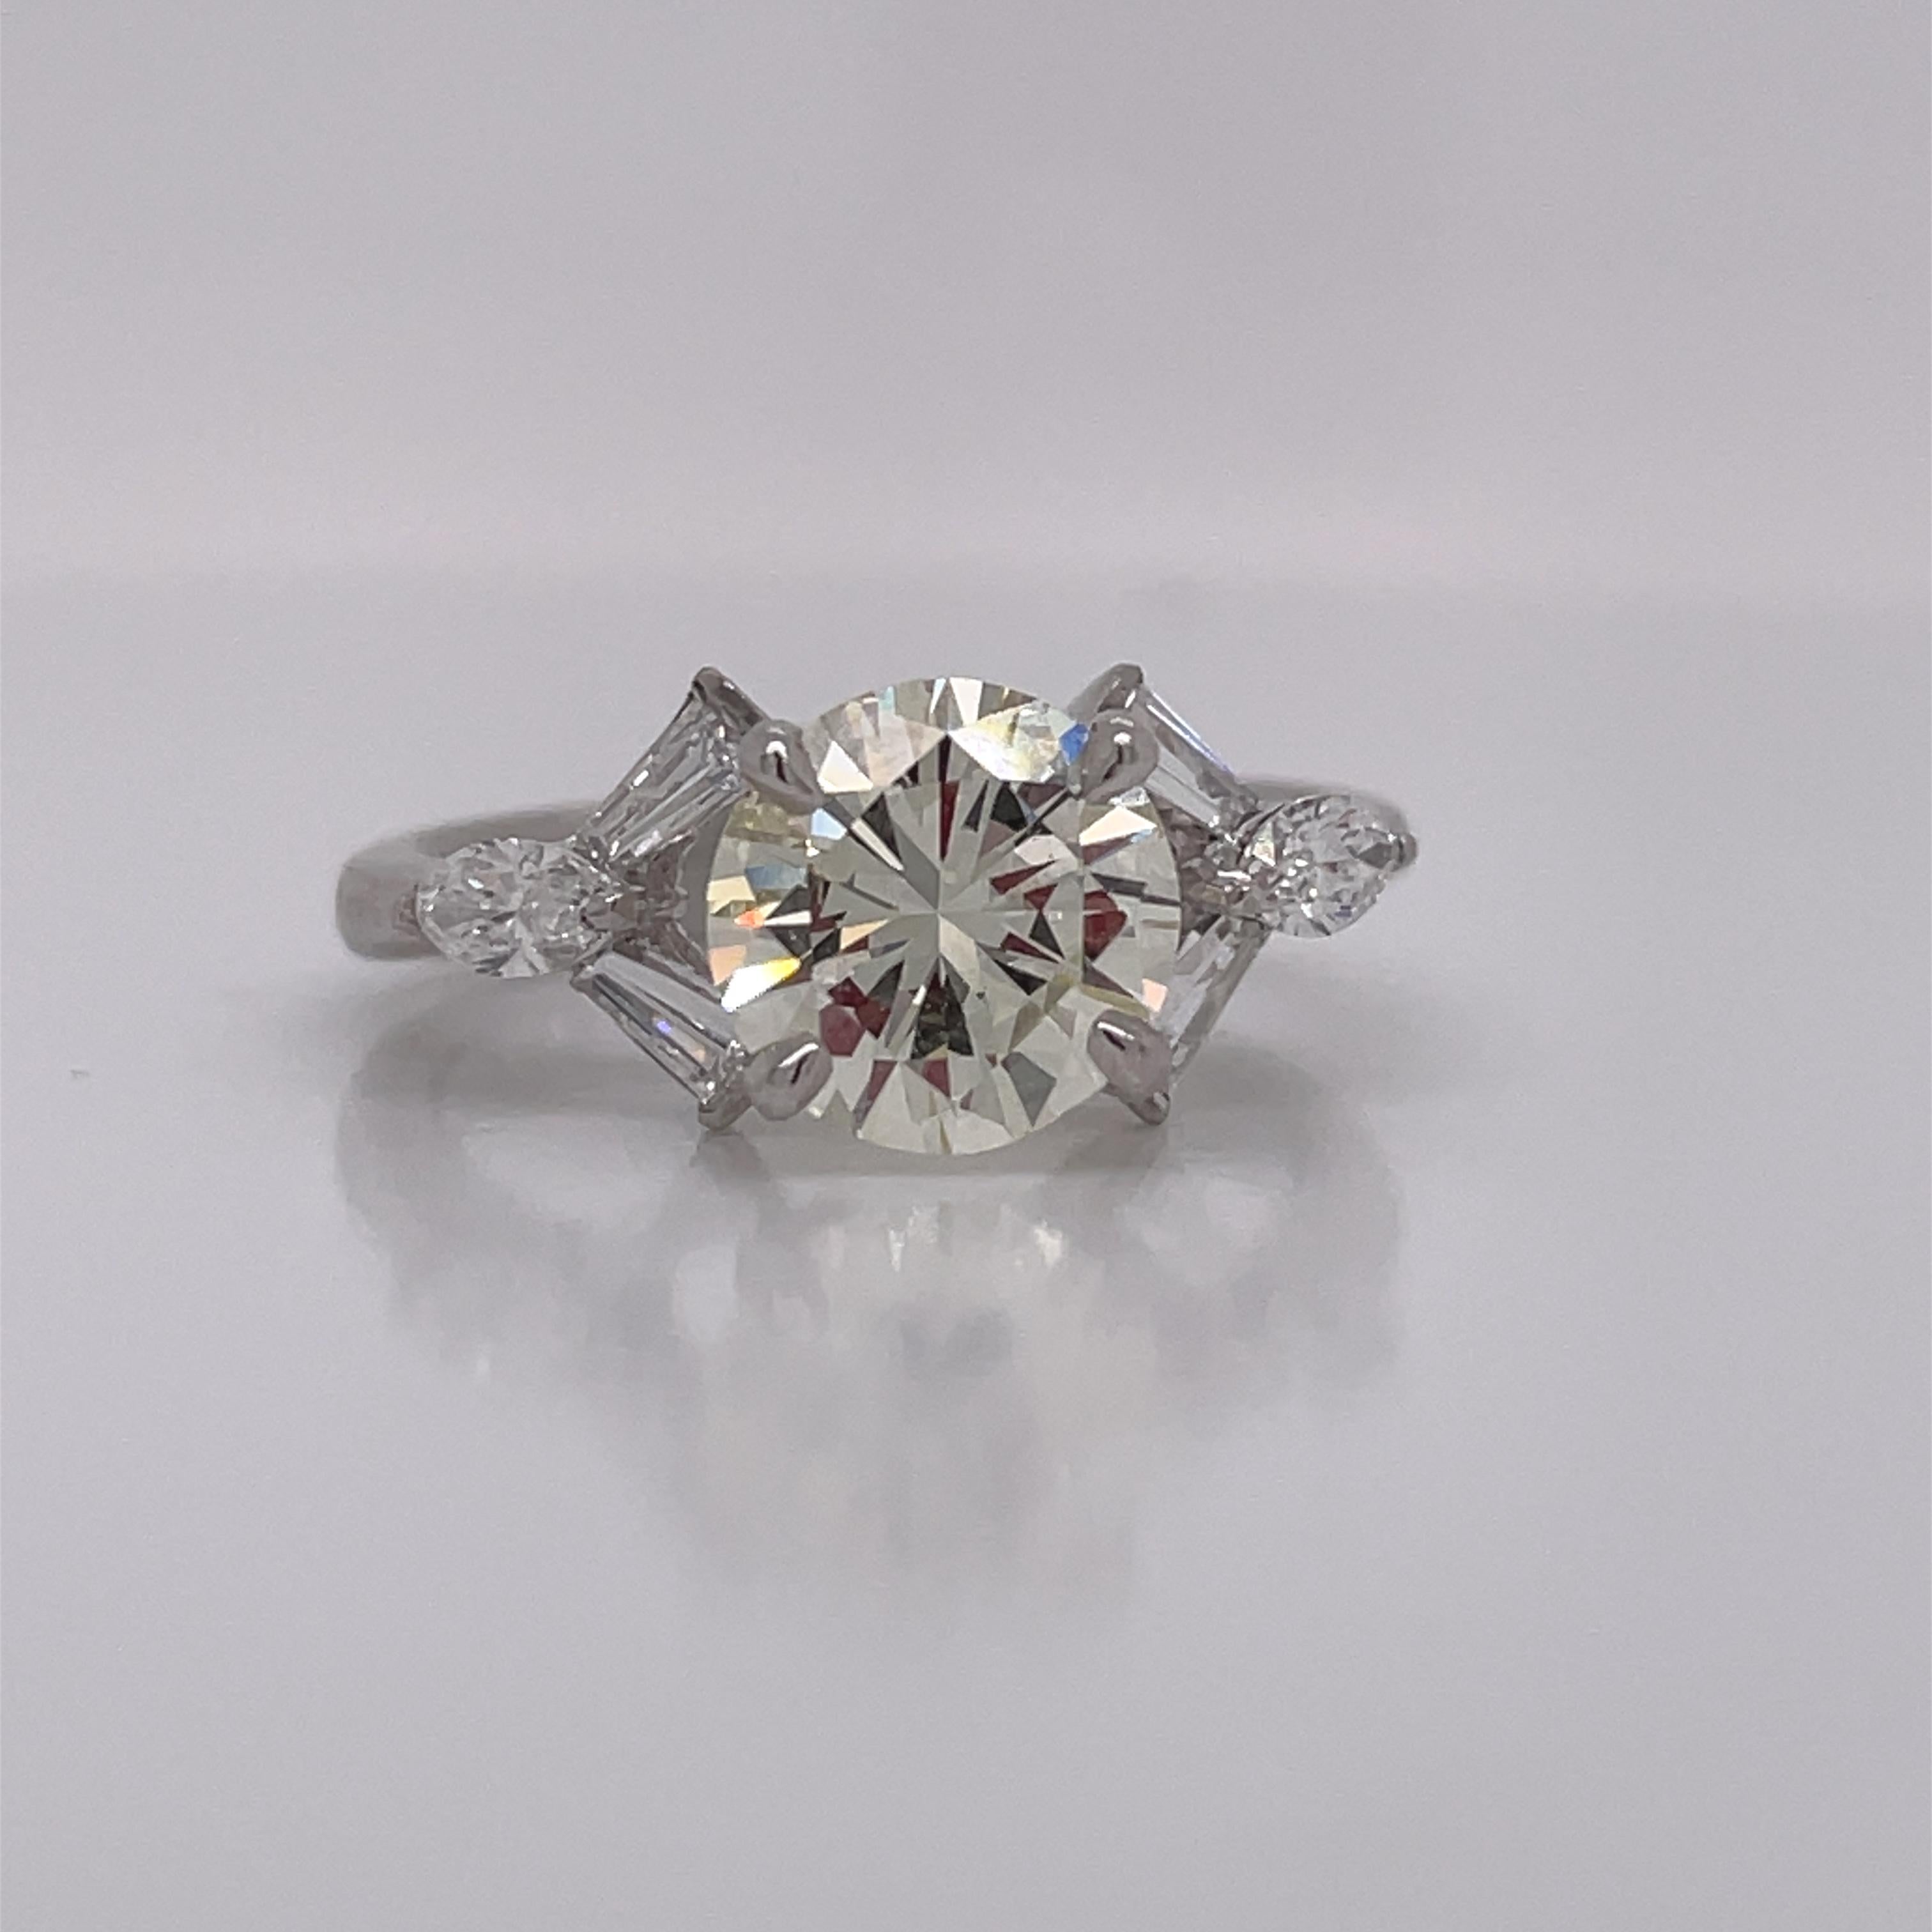 1950's Platinum Diamond Ring with Tapered Baguettes In Excellent Condition For Sale In Lexington, KY